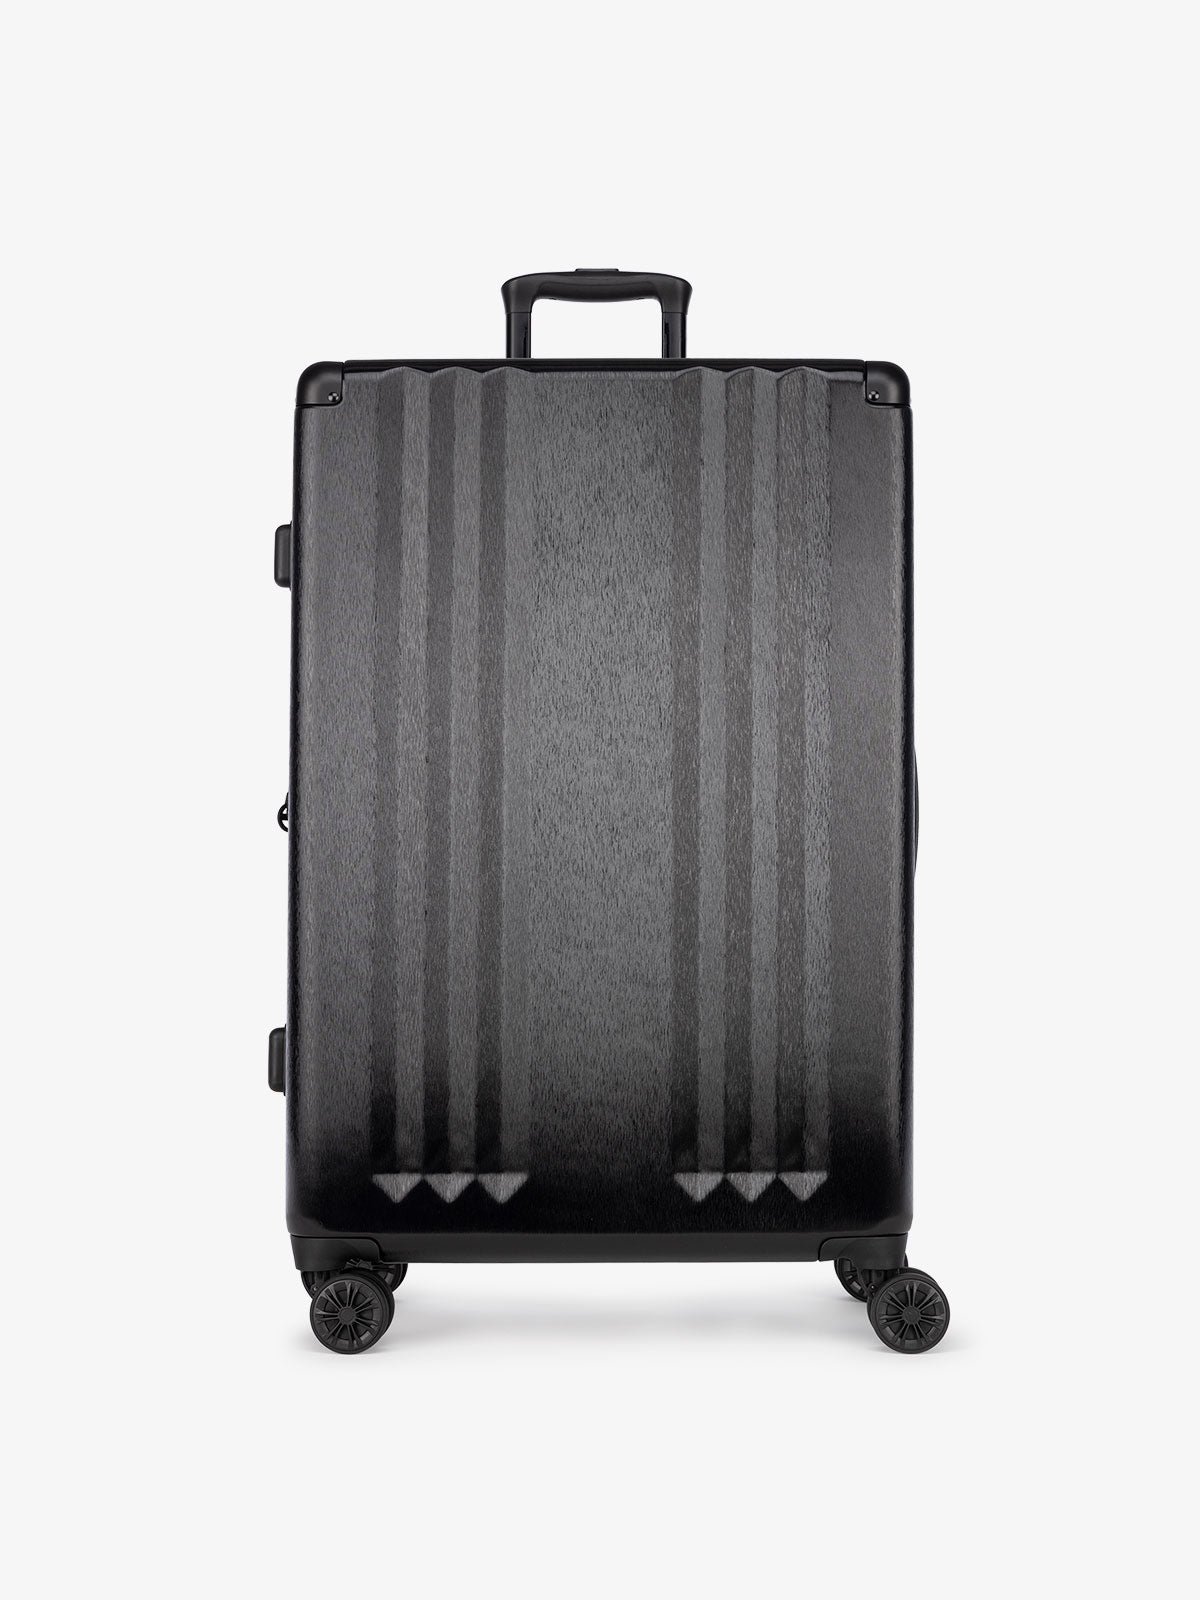 CALPAK Ambeur: black hard shell large suitcase as a part of luggage set